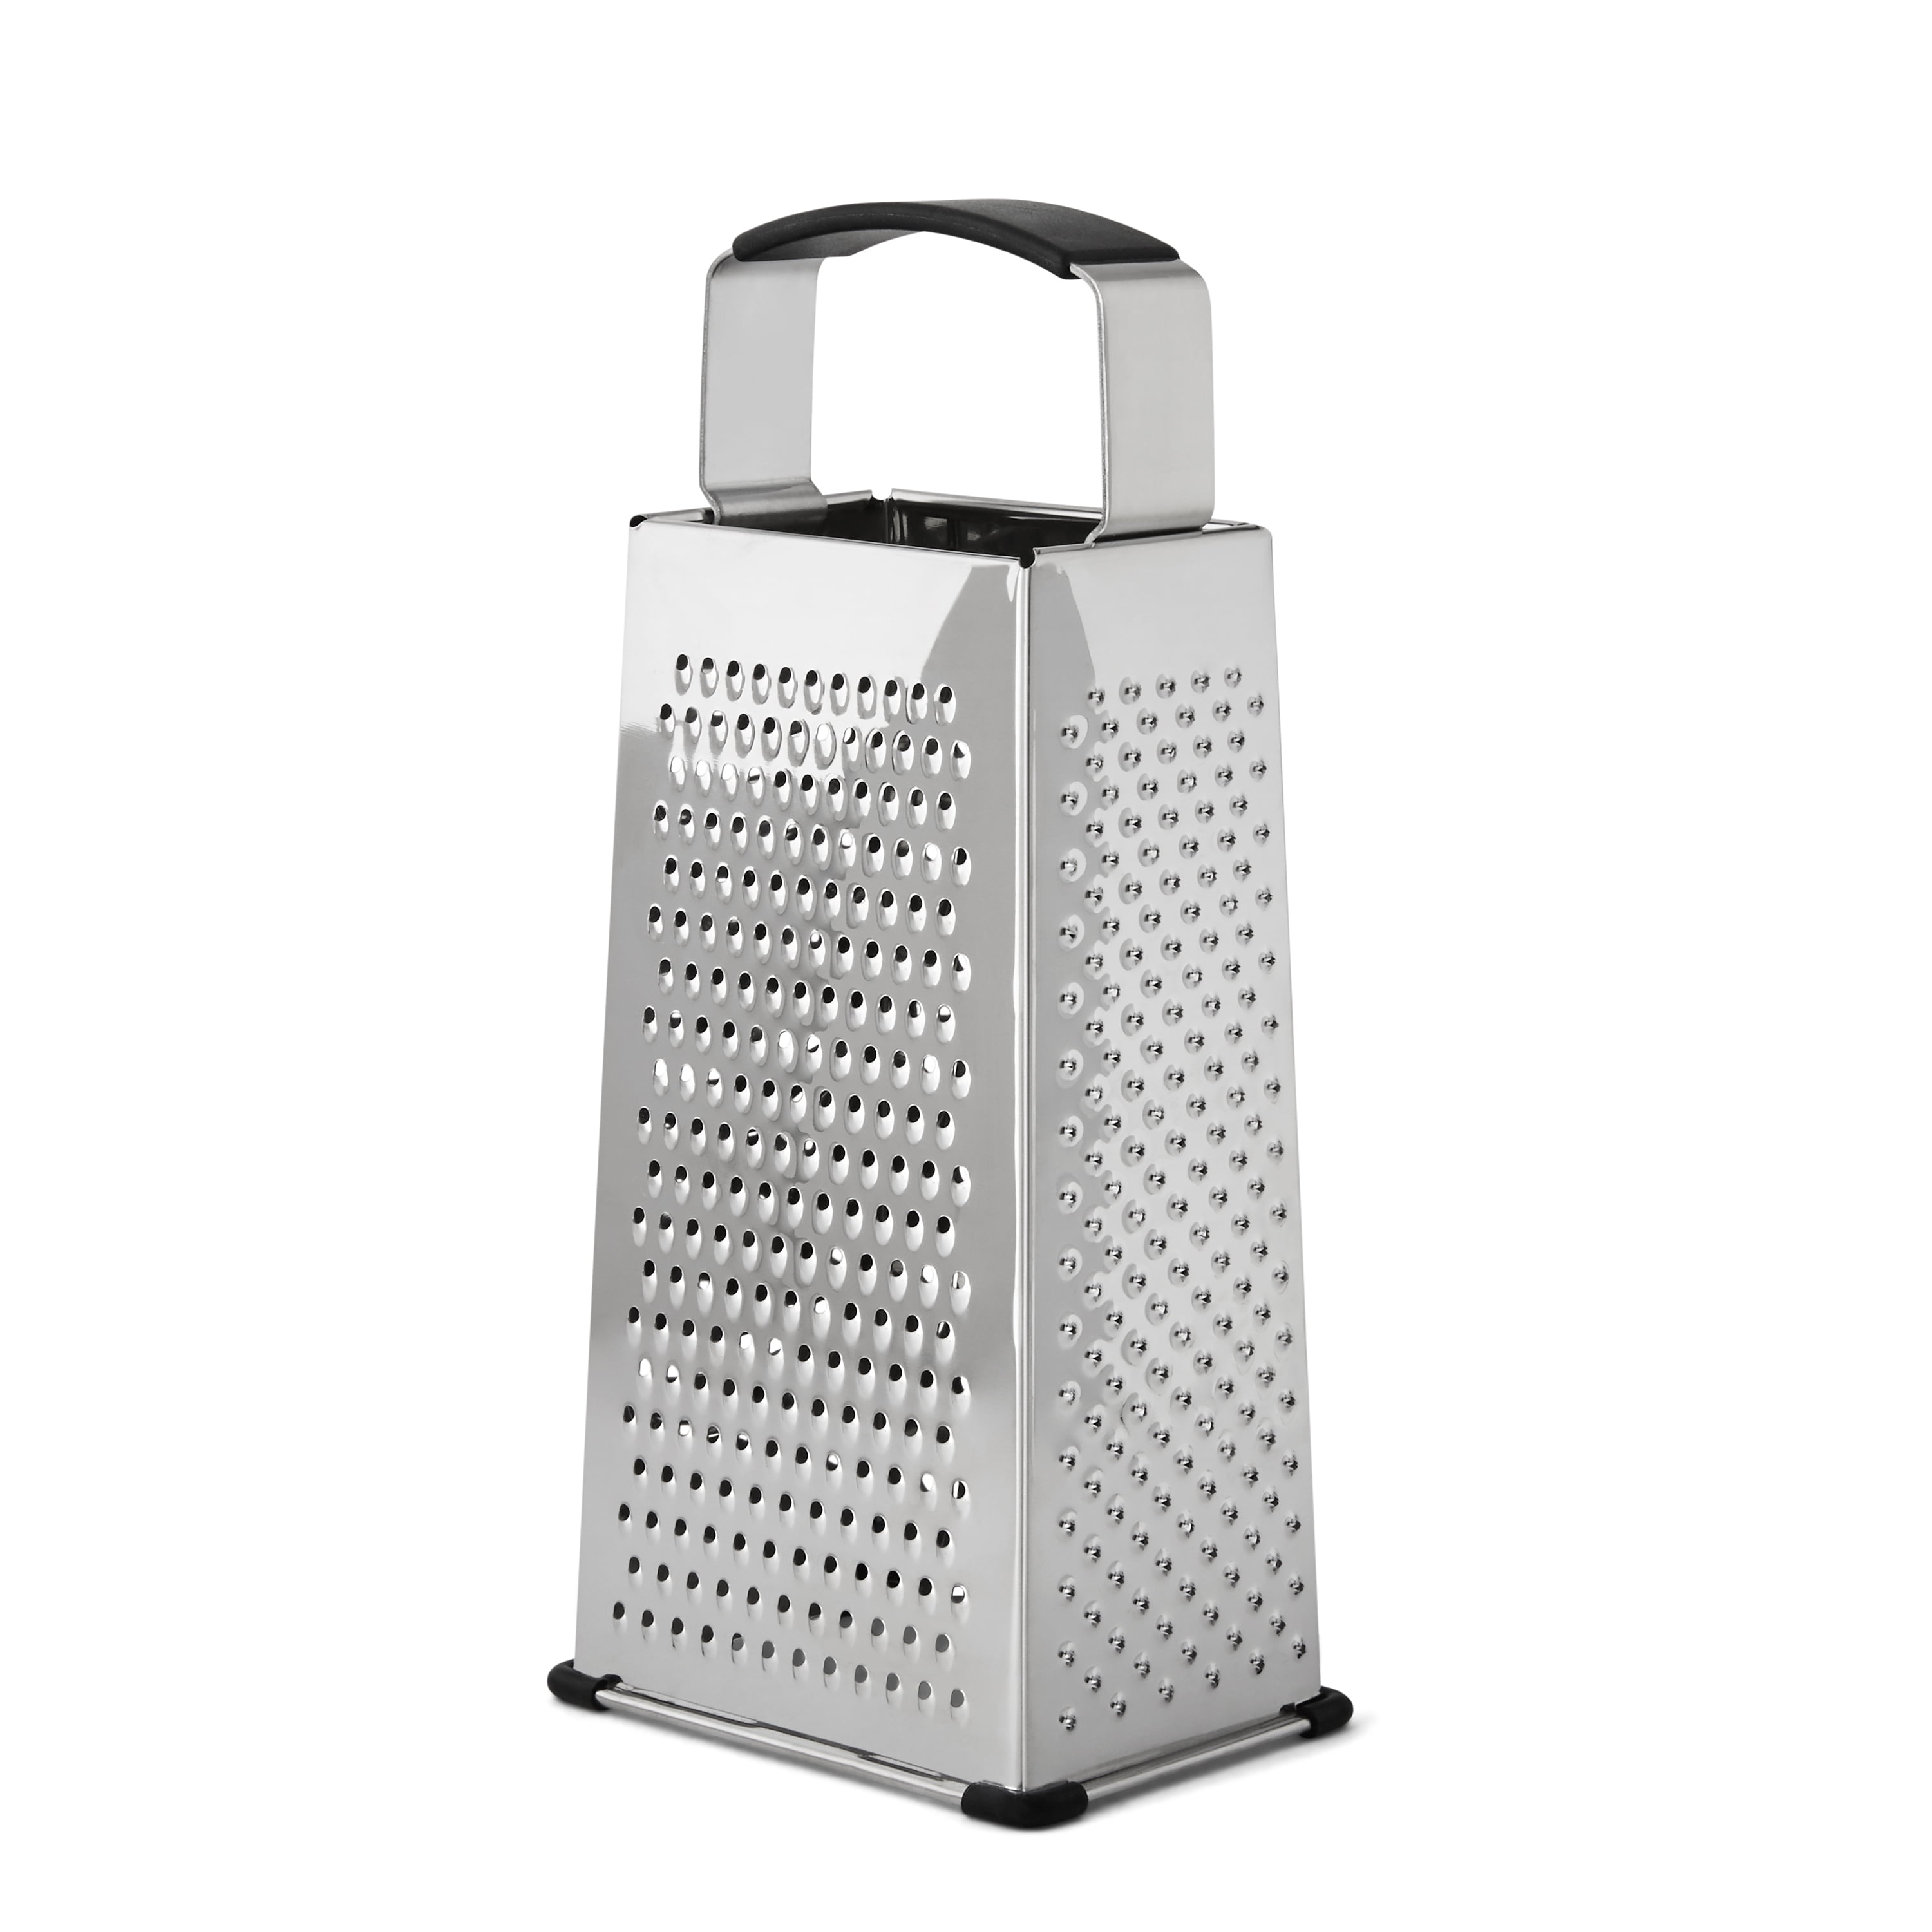 CraftKitchen 6 Sided box Grater has a soft-grip handle and a non-slip base 